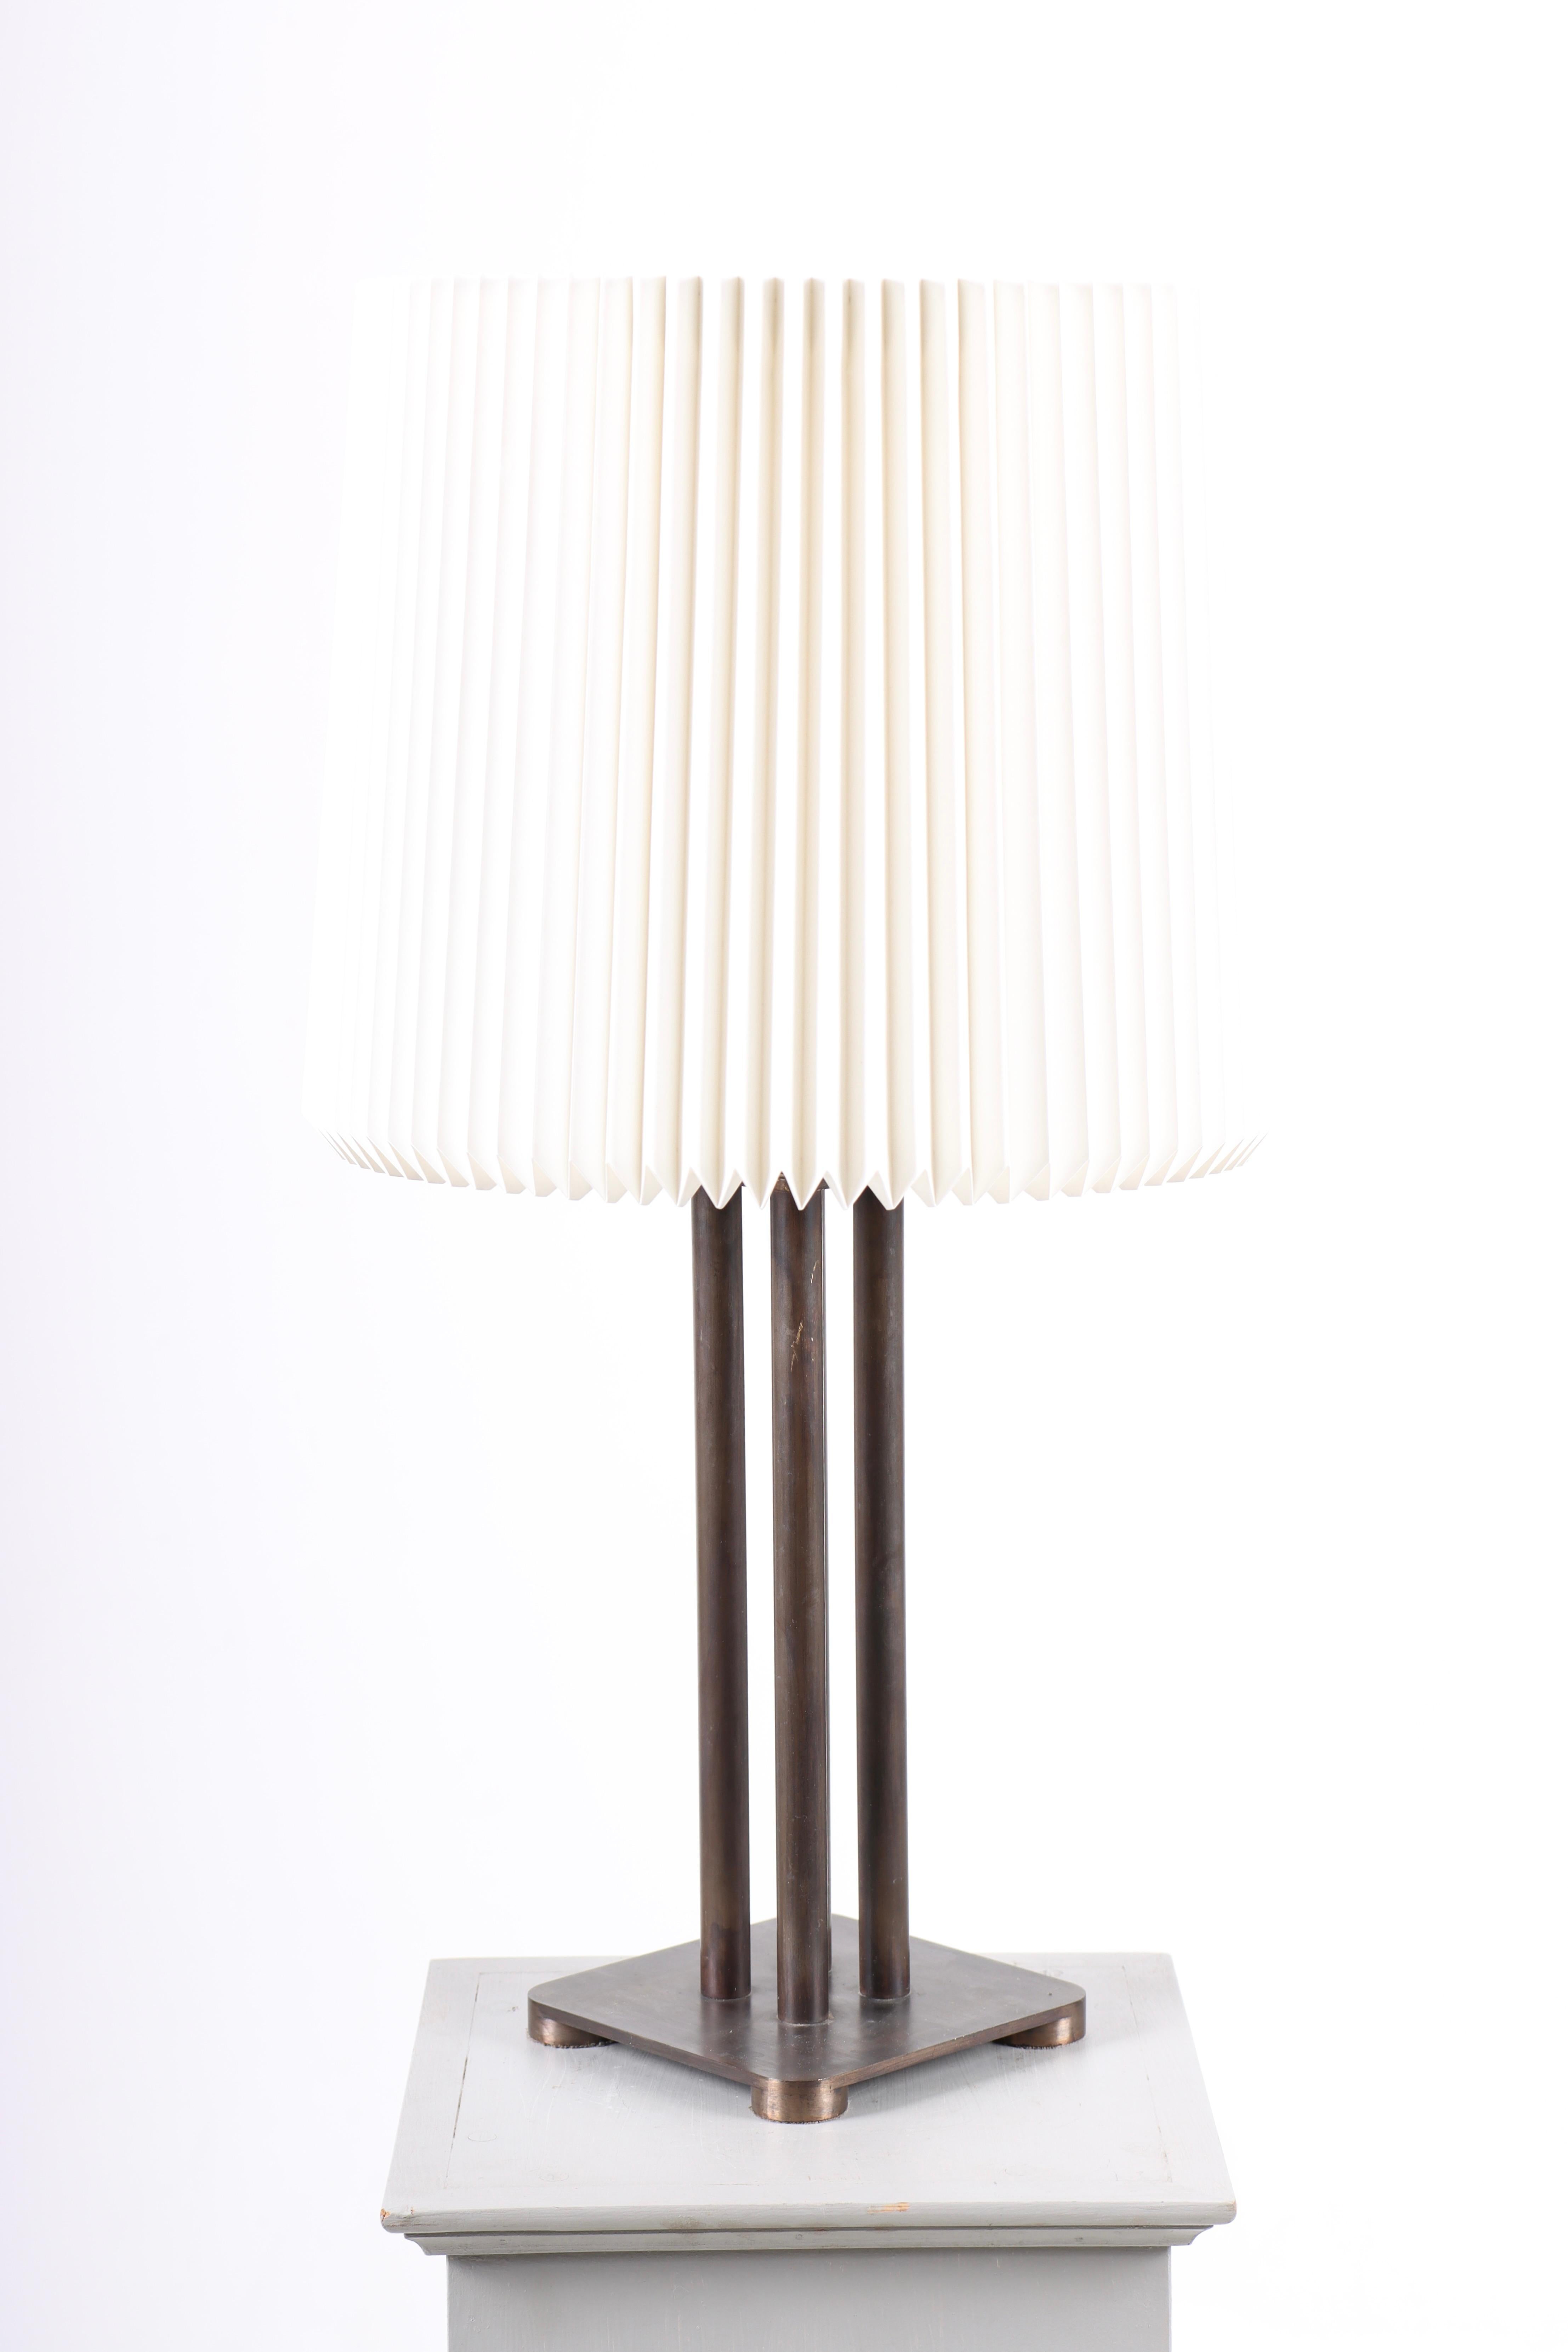 Scandinavian Modern Mid-Century Danish Table Lamp in Brass with Le Klint Shade, 1950s For Sale